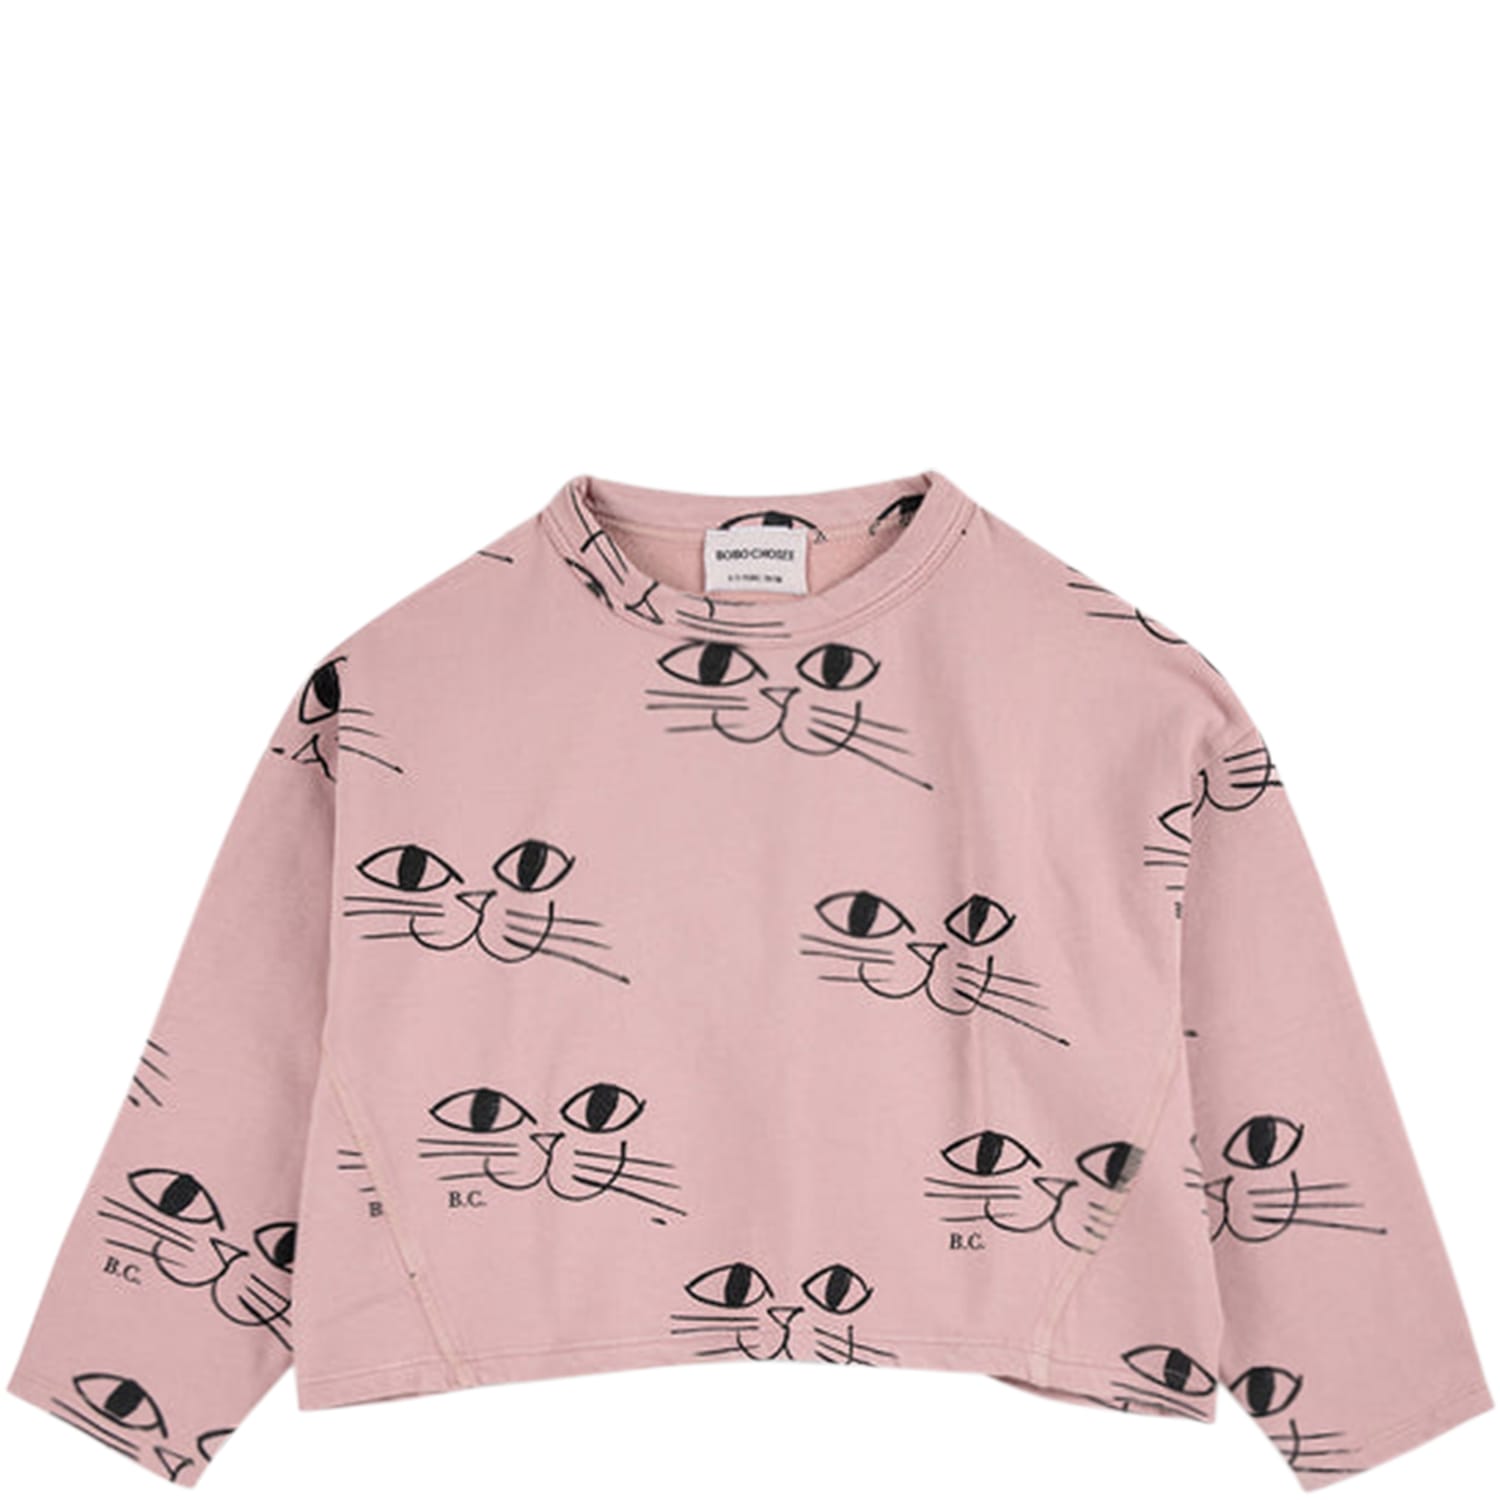 BOBO CHOSES PINK SWEATSHIRT FOR GIRL WITH CATS PRINT AND LOGO